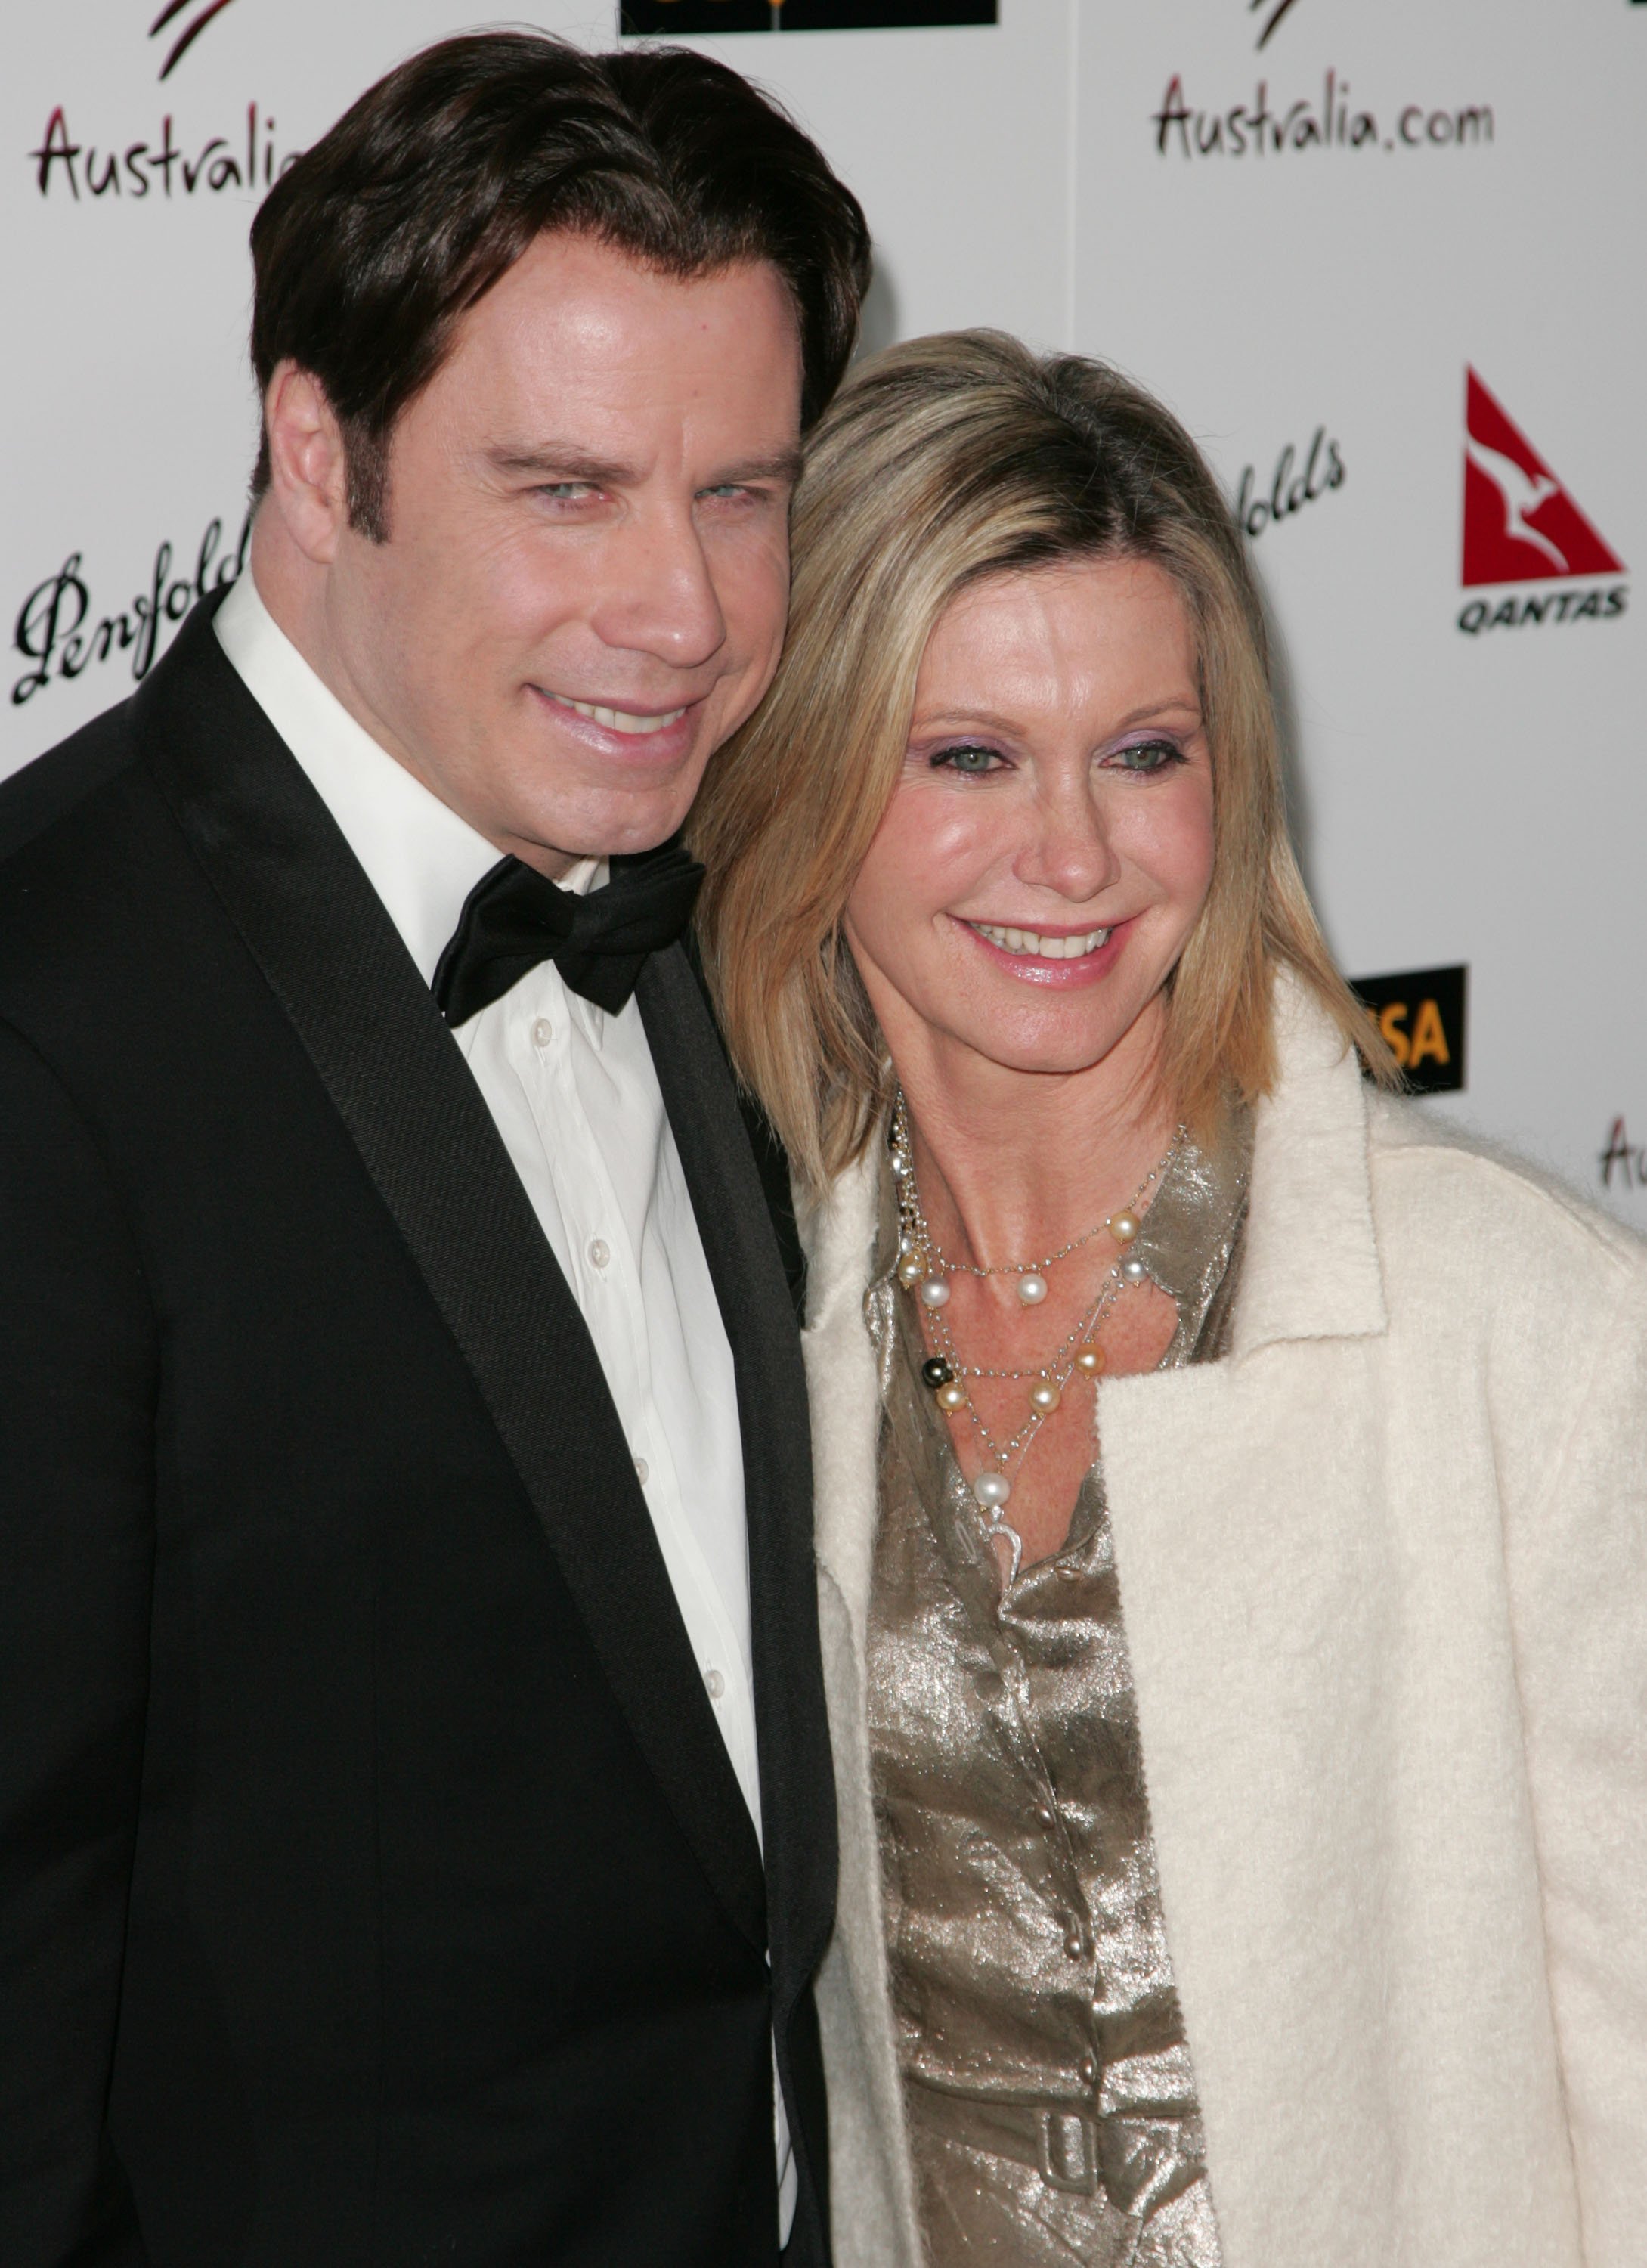 John Travolta and singer Olivia Newton-John arrive at the G'DAY USA Australia.com Black Tie Gala held at the Hollywood and Highland Grand Ballroom on January 19, 2008, in Hollywood, California. | Source: Getty Images.